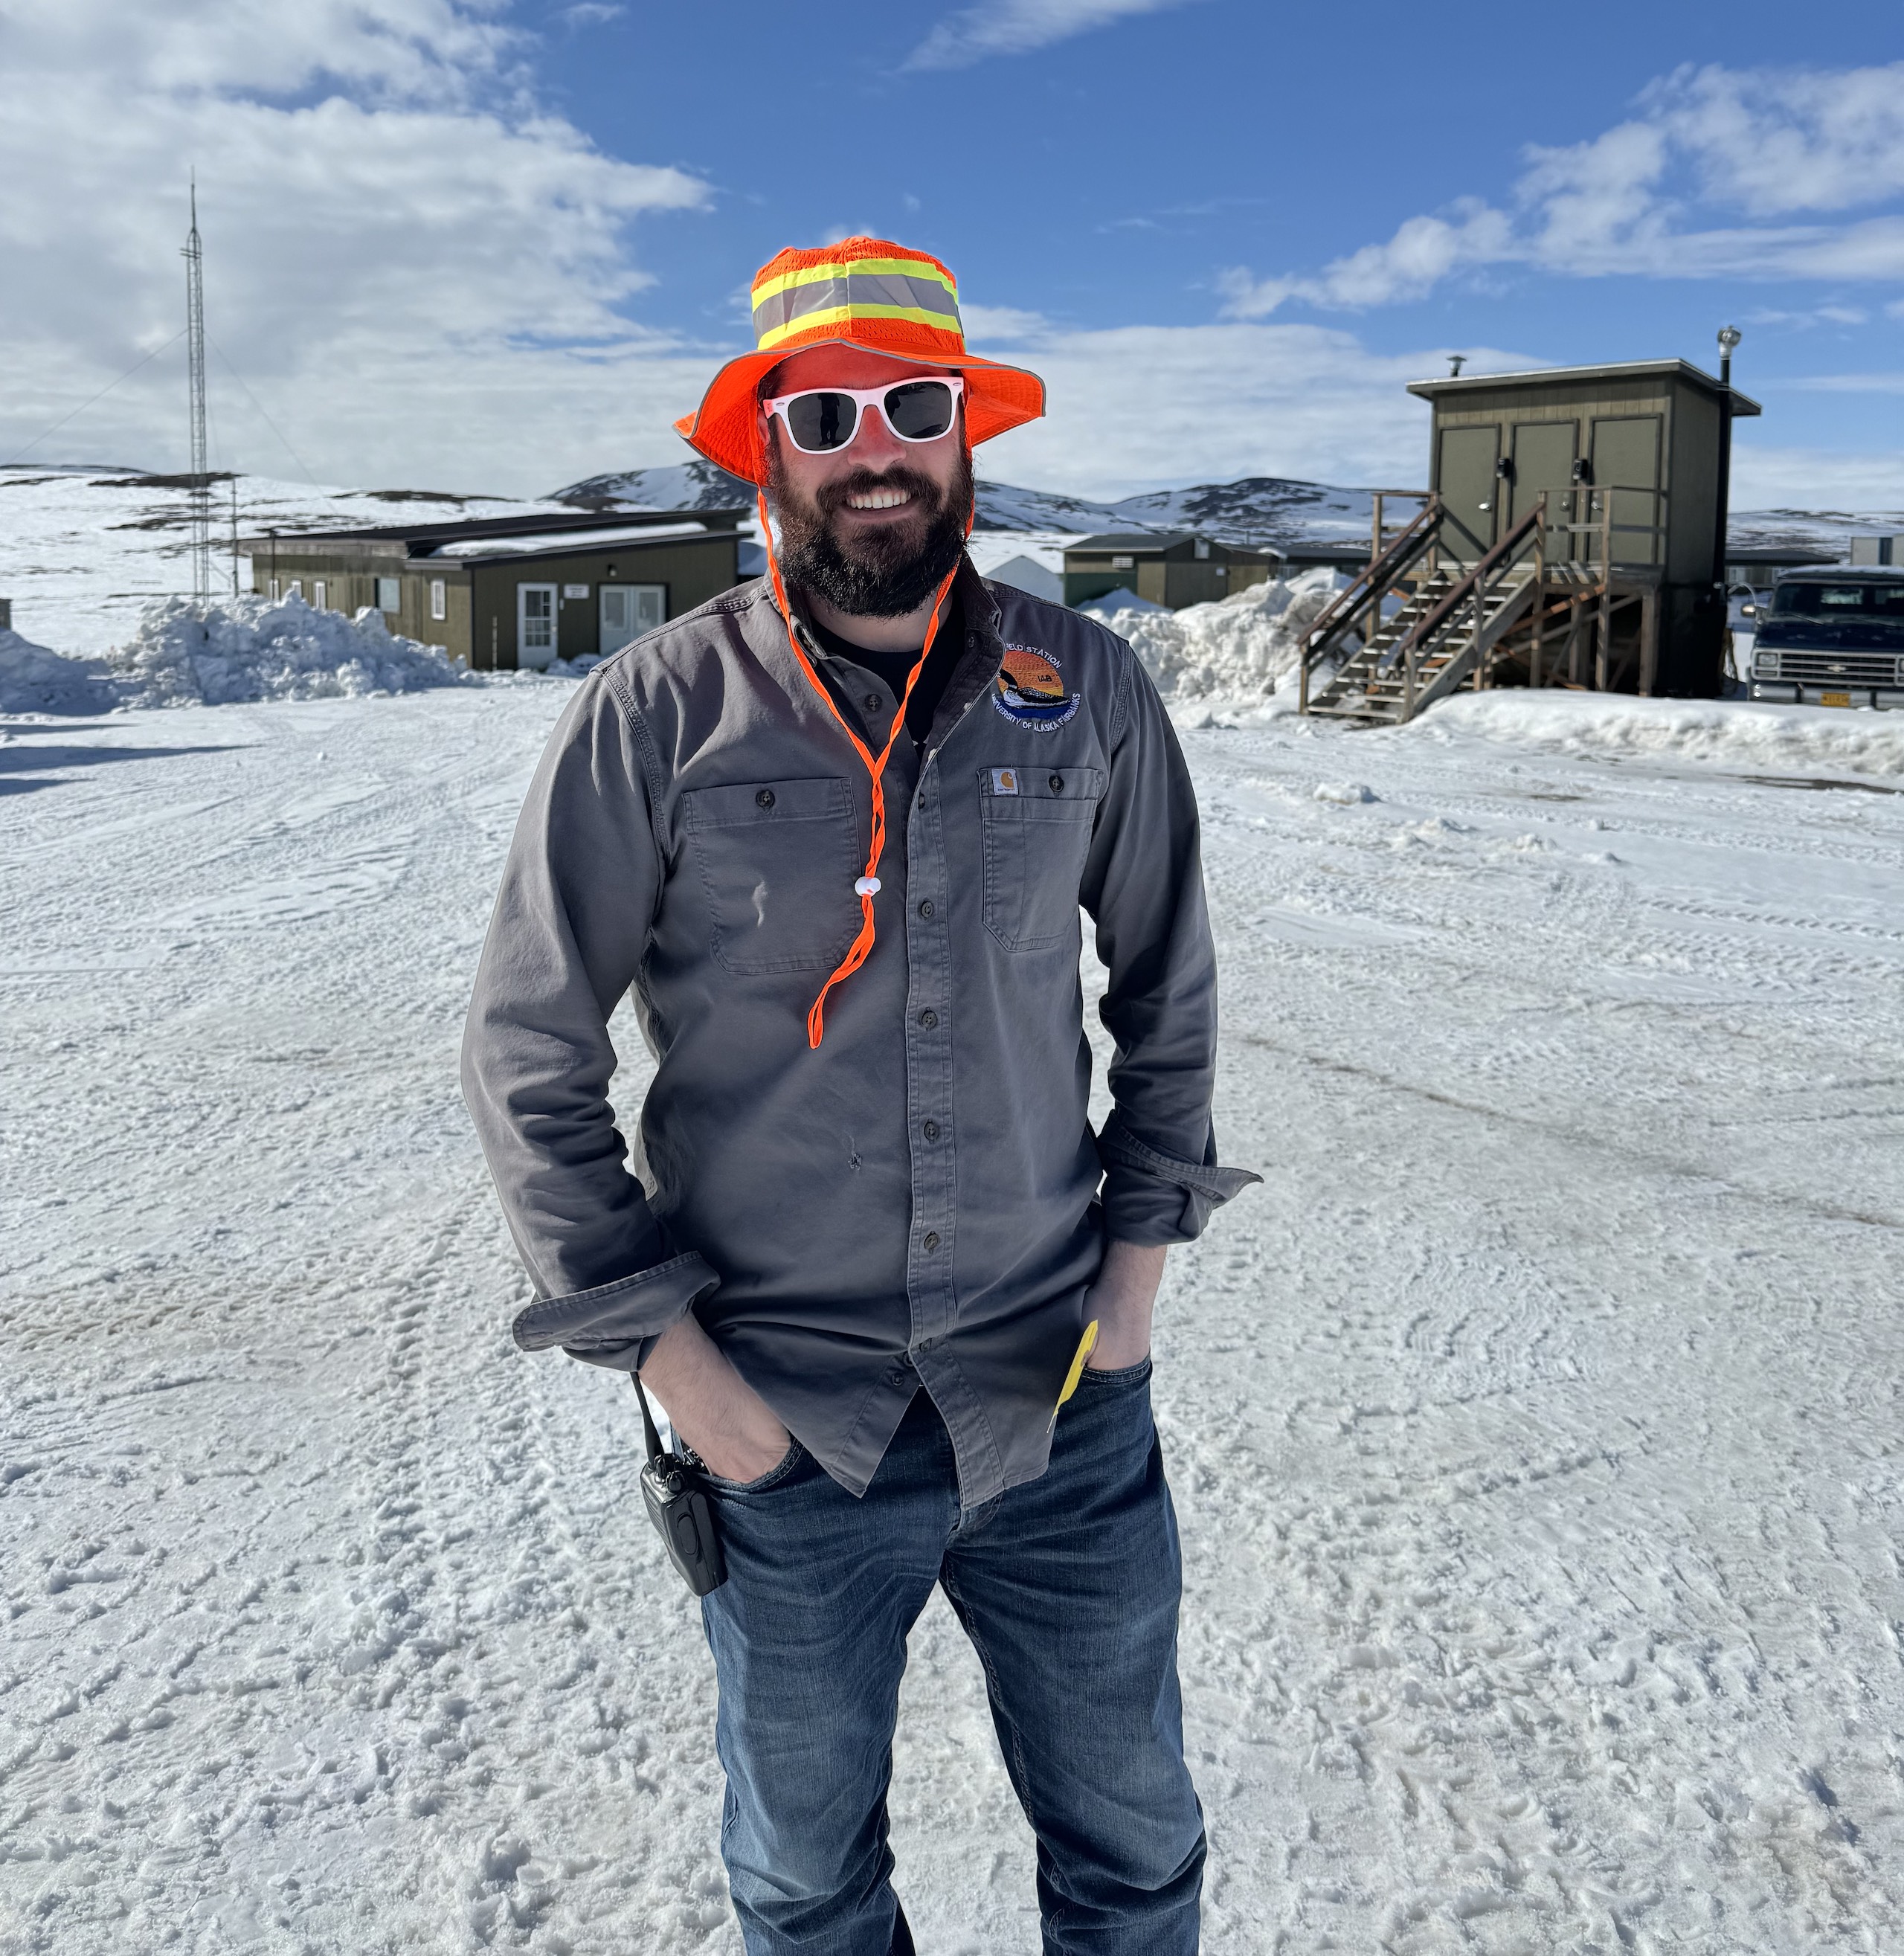 Safety Coordinator and lead EMT Scott Filippone demonstrates proper protective gear on a sunny spring day at Toolik Field Station.